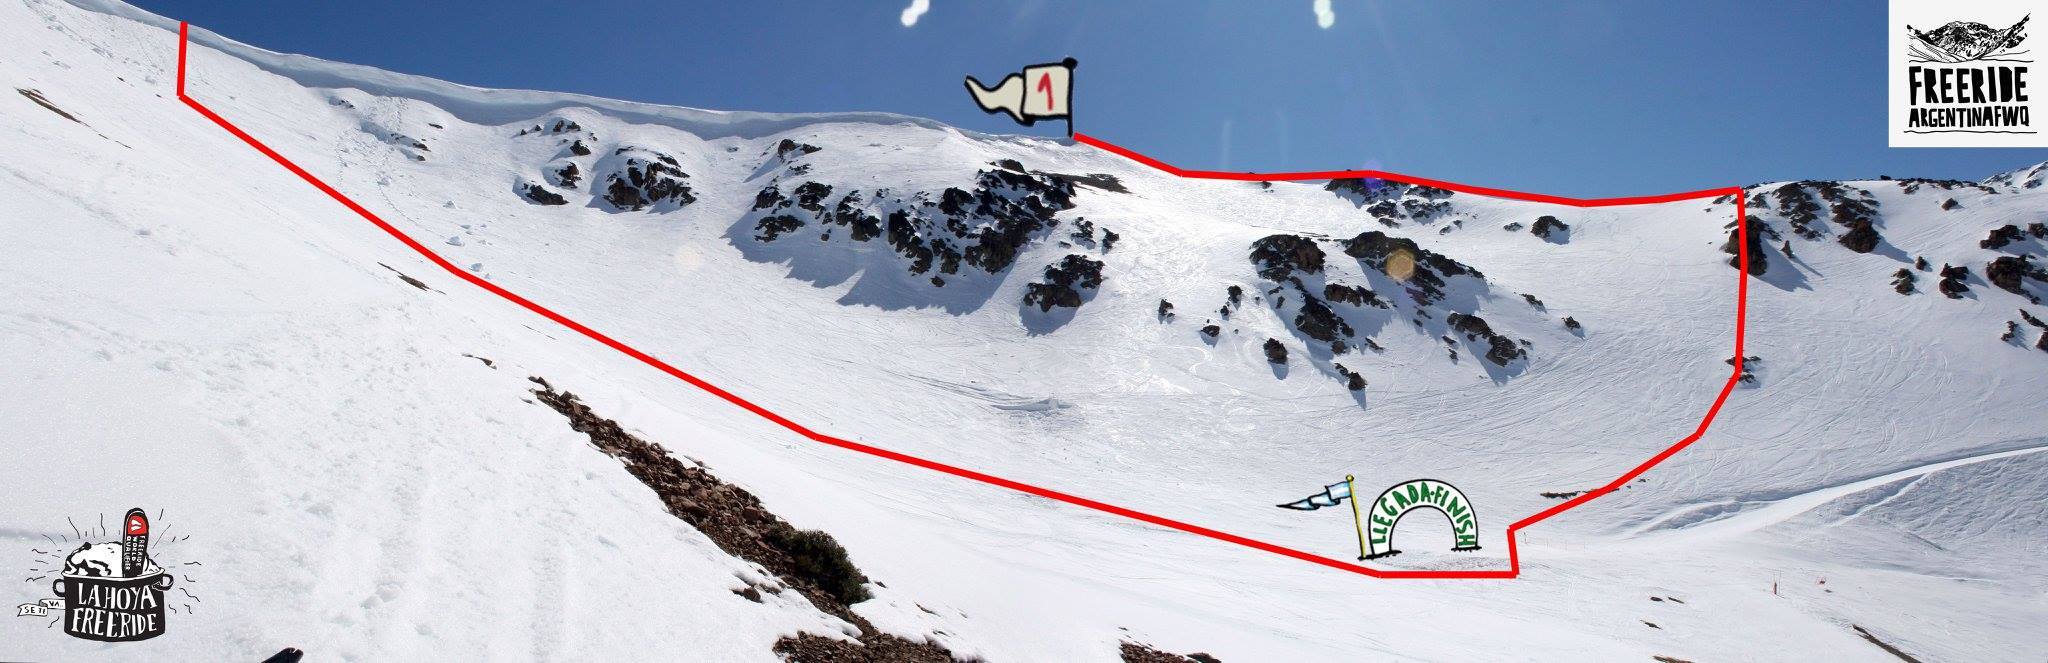 La Hoya Freeride World Qualifier venue. The crash occurred within the red lines. image: freeride world tour 